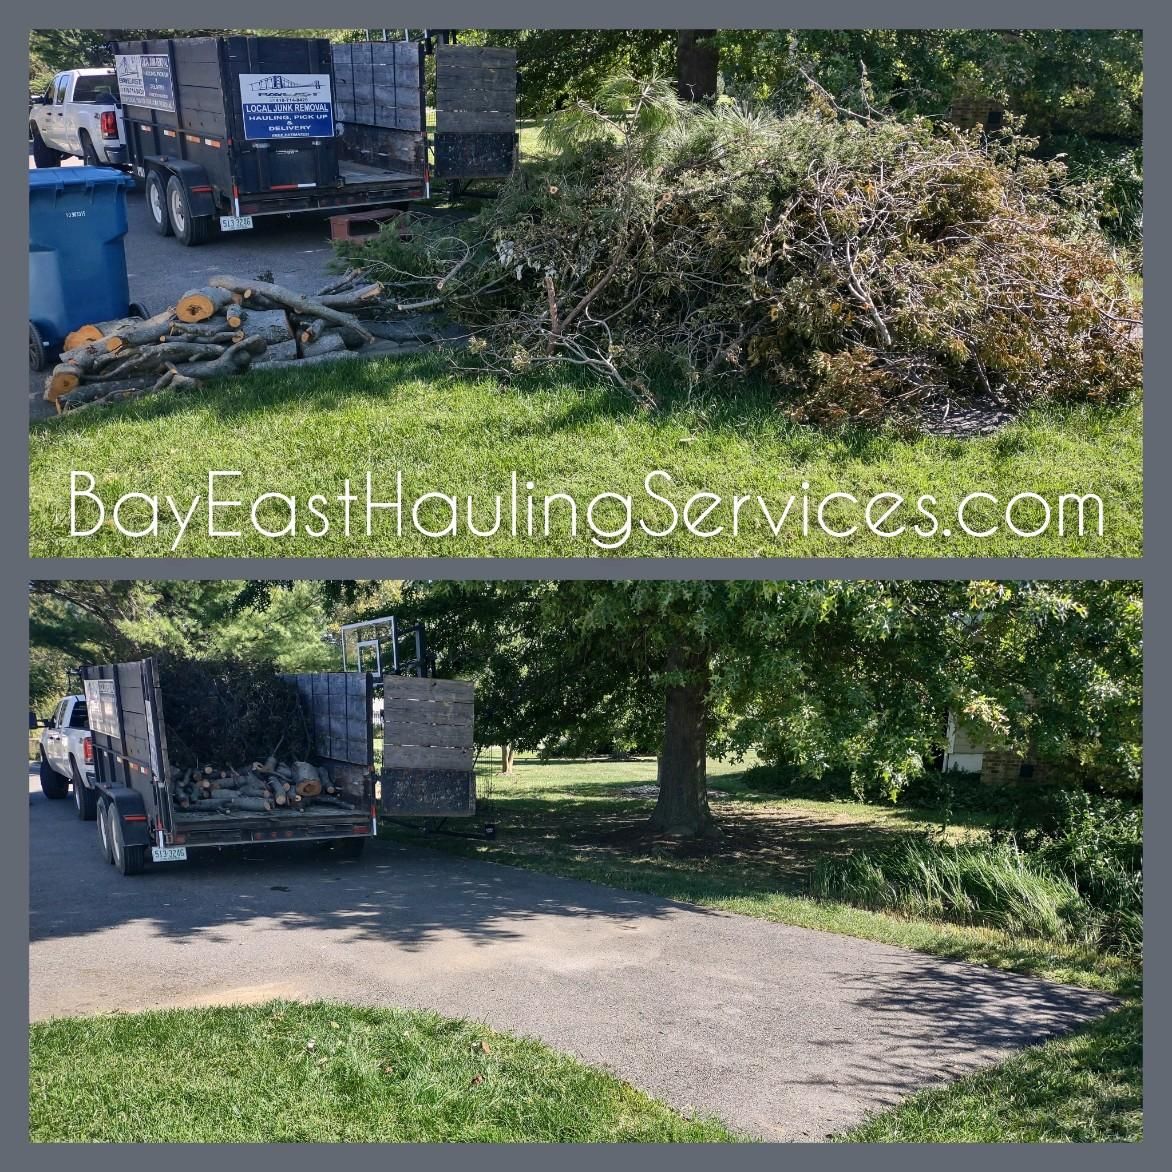 Yard Waste Removal for Bay East Hauling Services & Junk Removal in Grasonville, MD